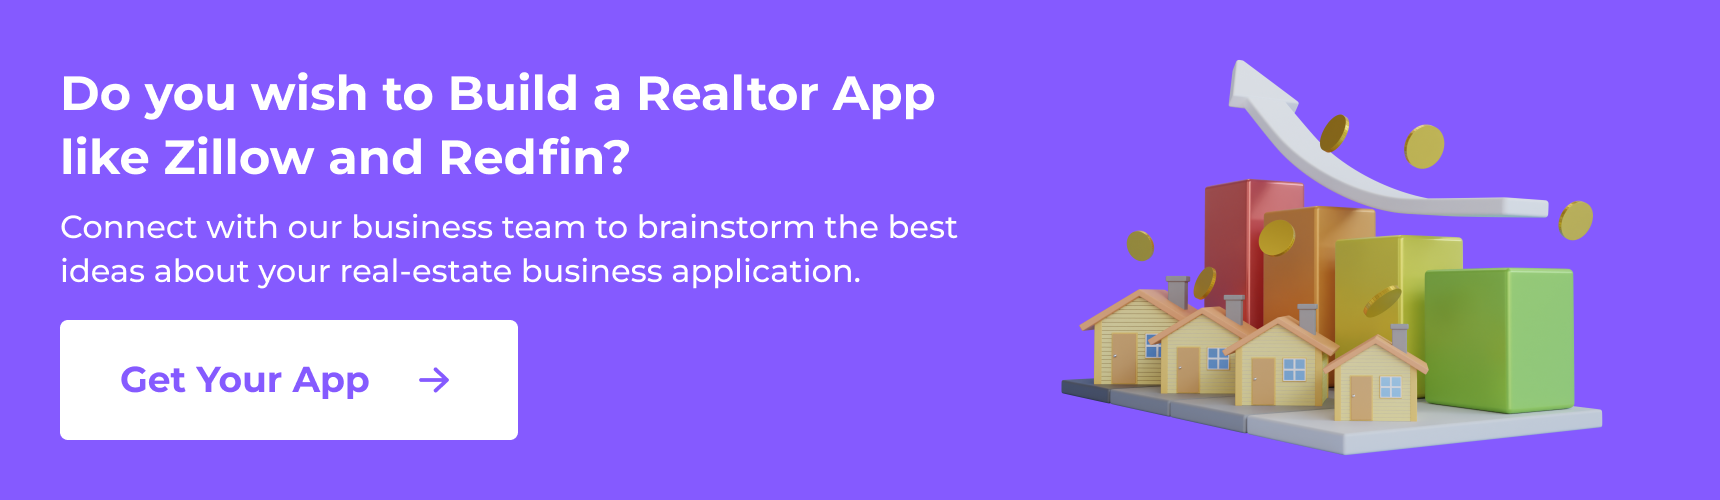 Build a Realtor App like Zillow and Redfin